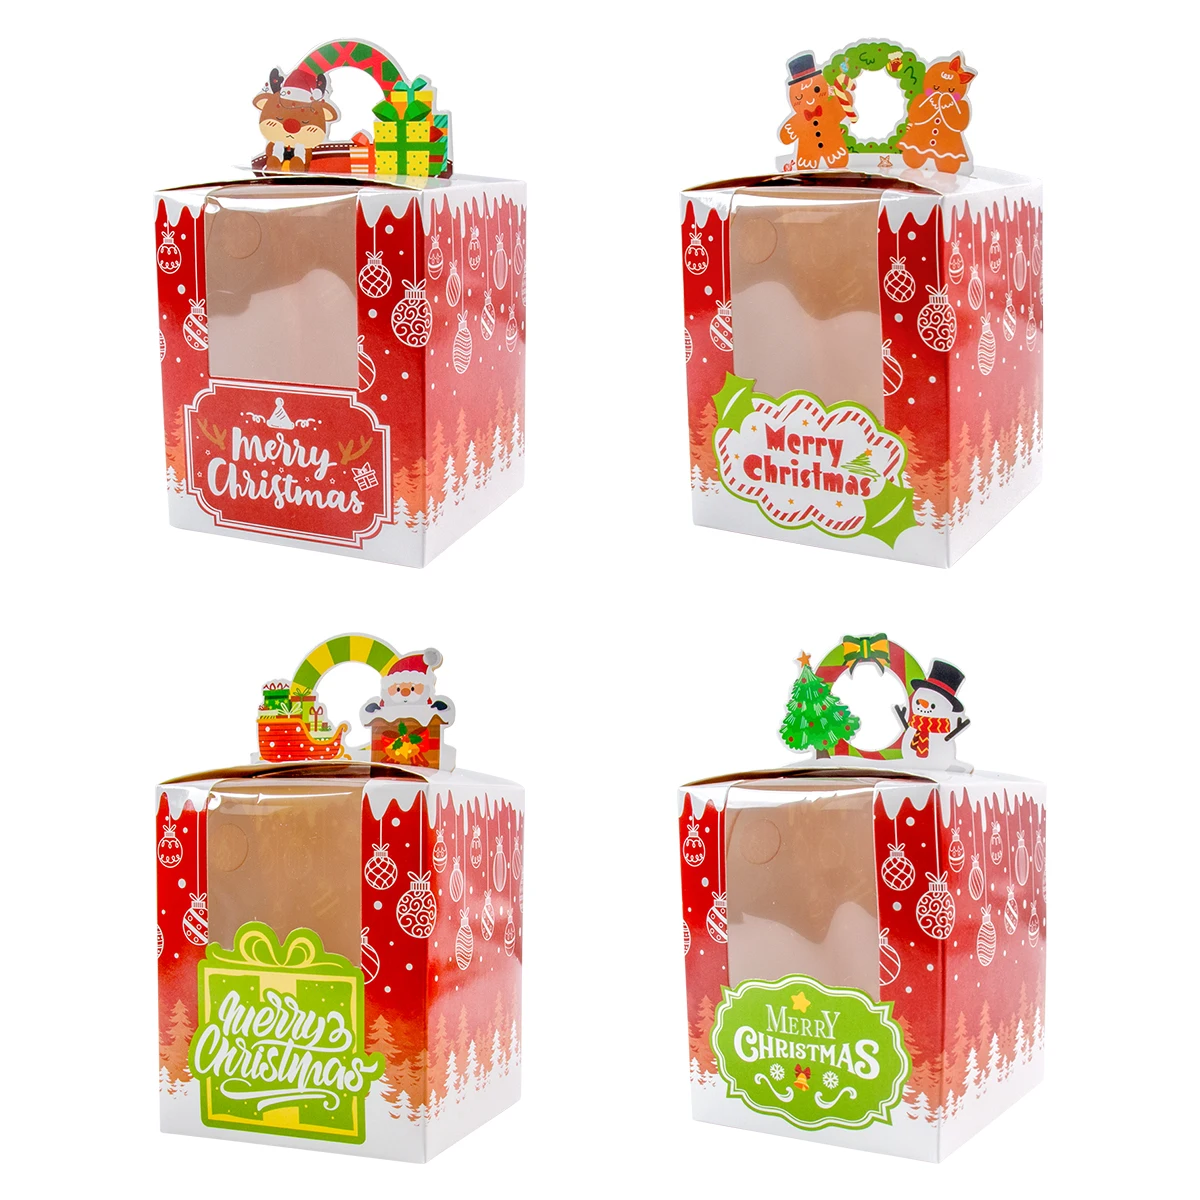 

12pcs Cute Christmas Gift Boxes DIY Candy Cookies Paper Boxes Santa Claus Snowman Merry Christmas Gifts Pack Box for Kids Noel